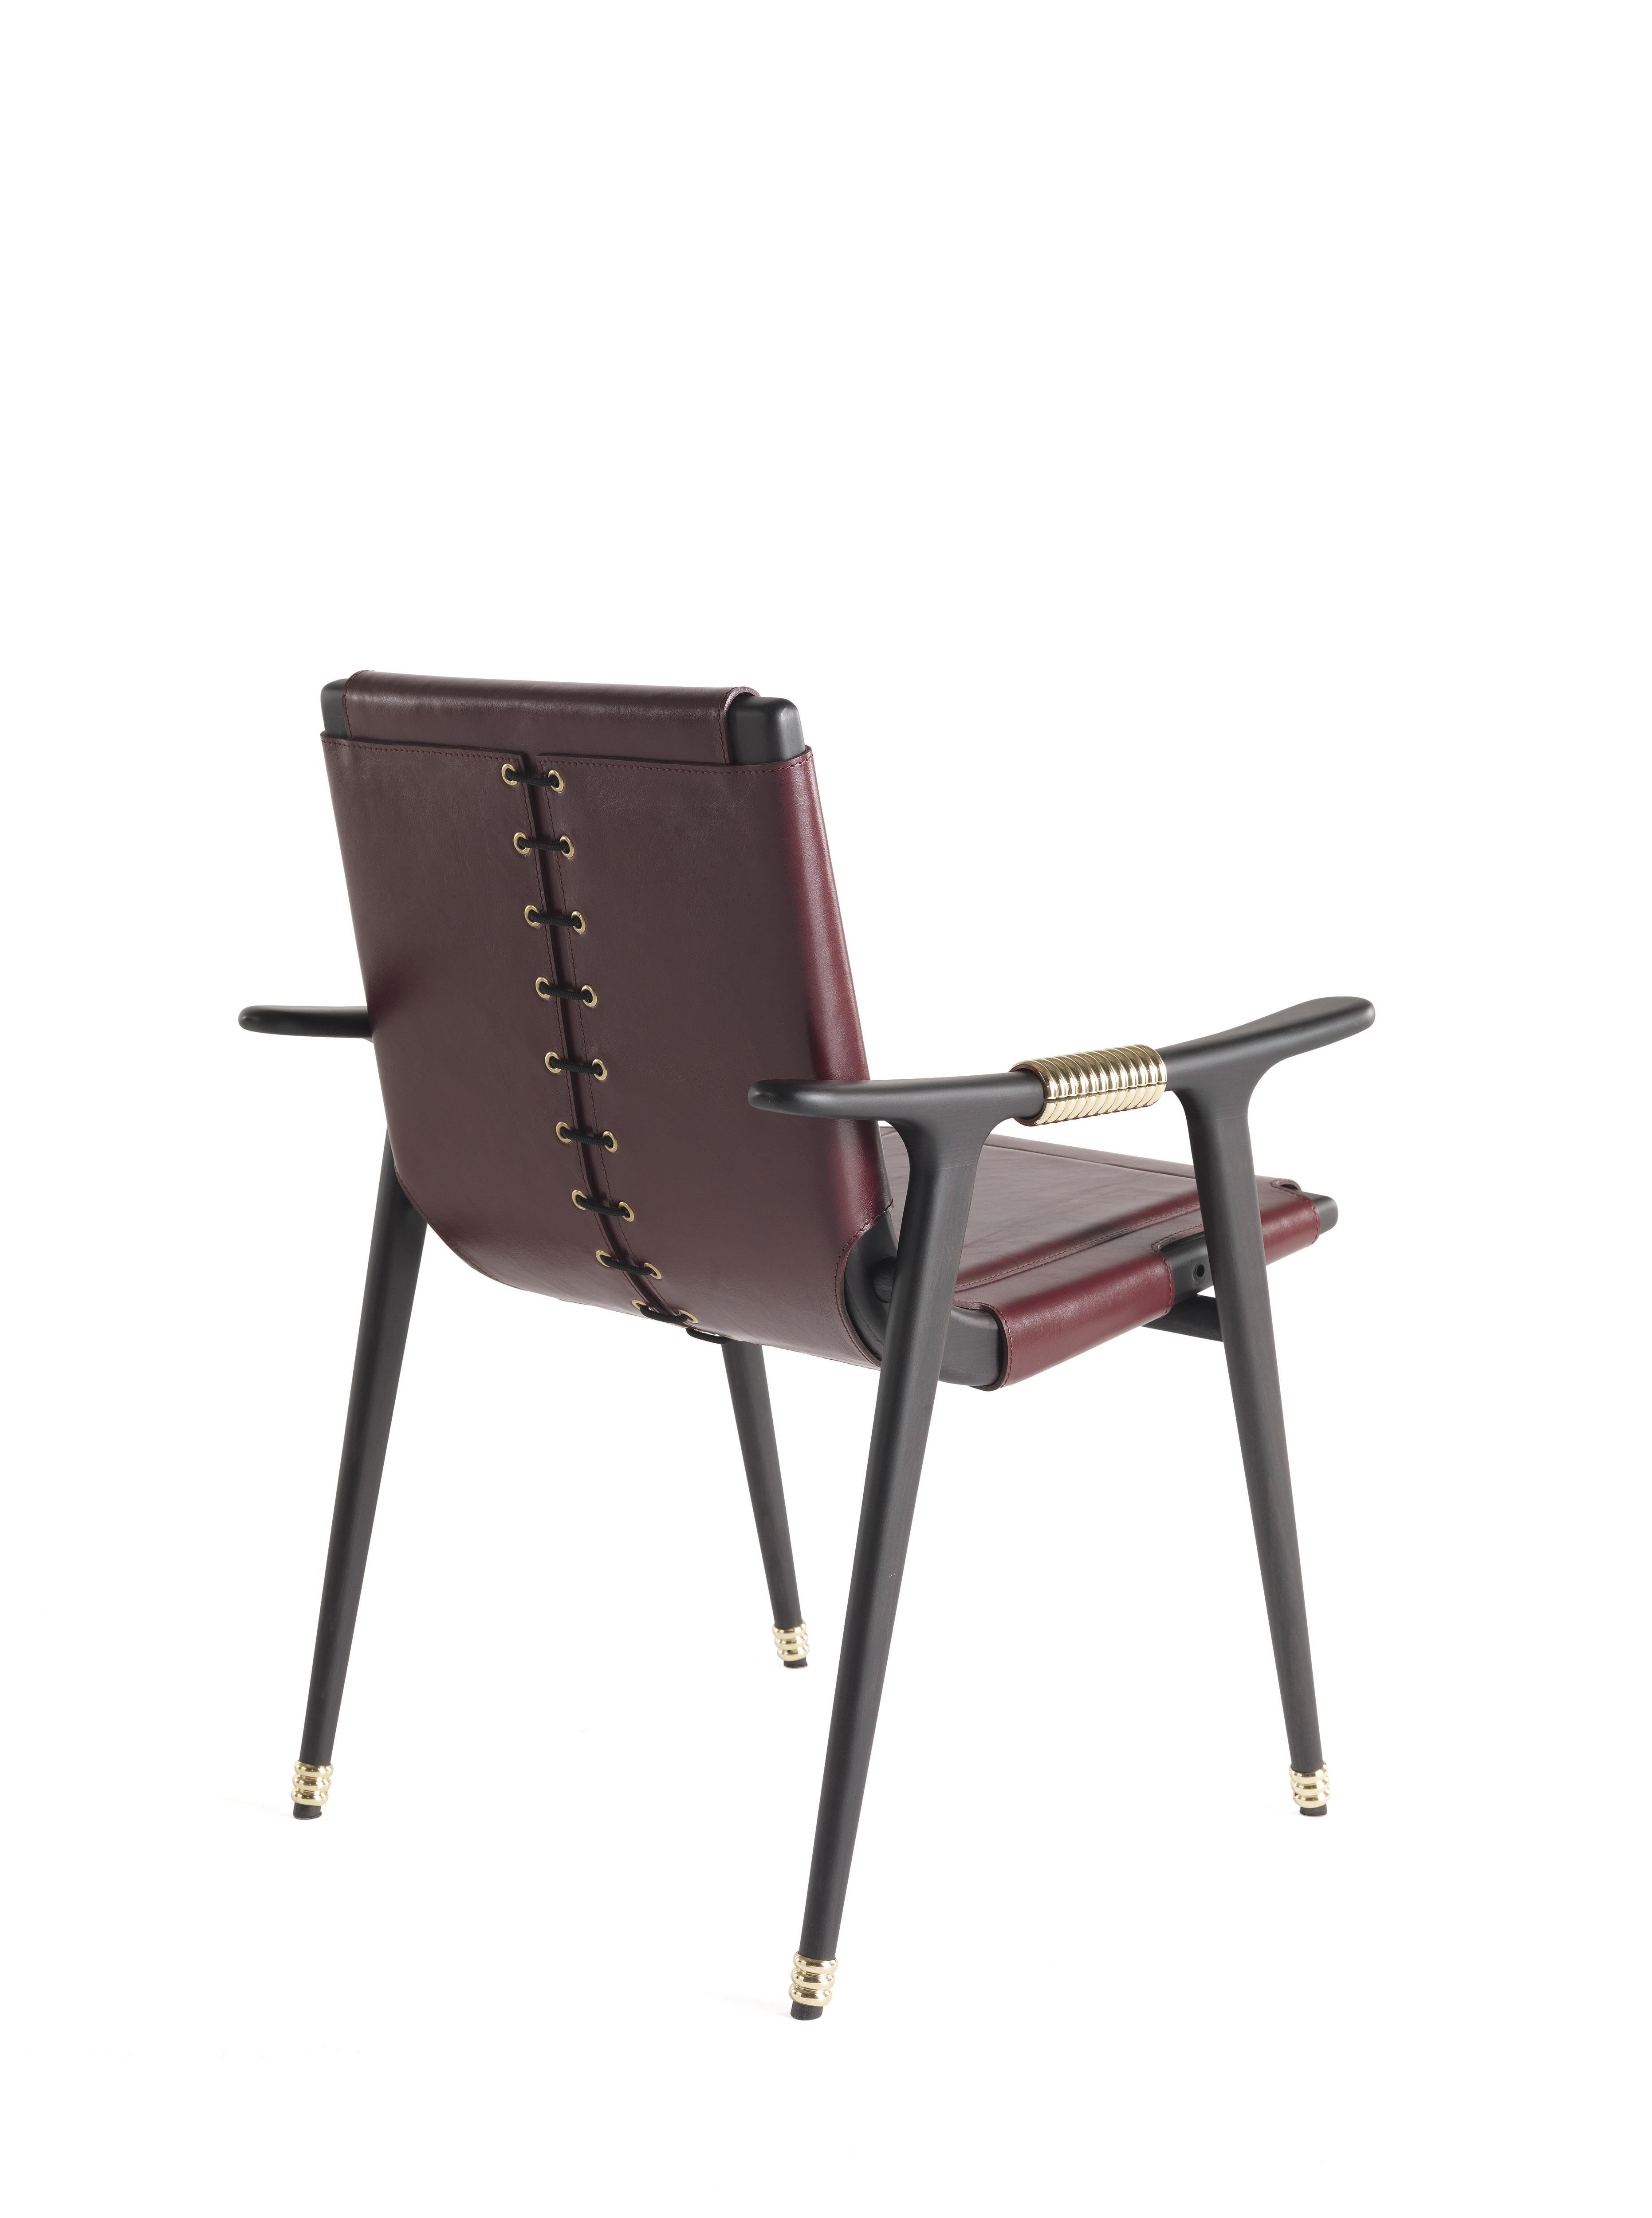 Italian 21st Century Dinka Chair with arms in Leather by Etro Home Interiors